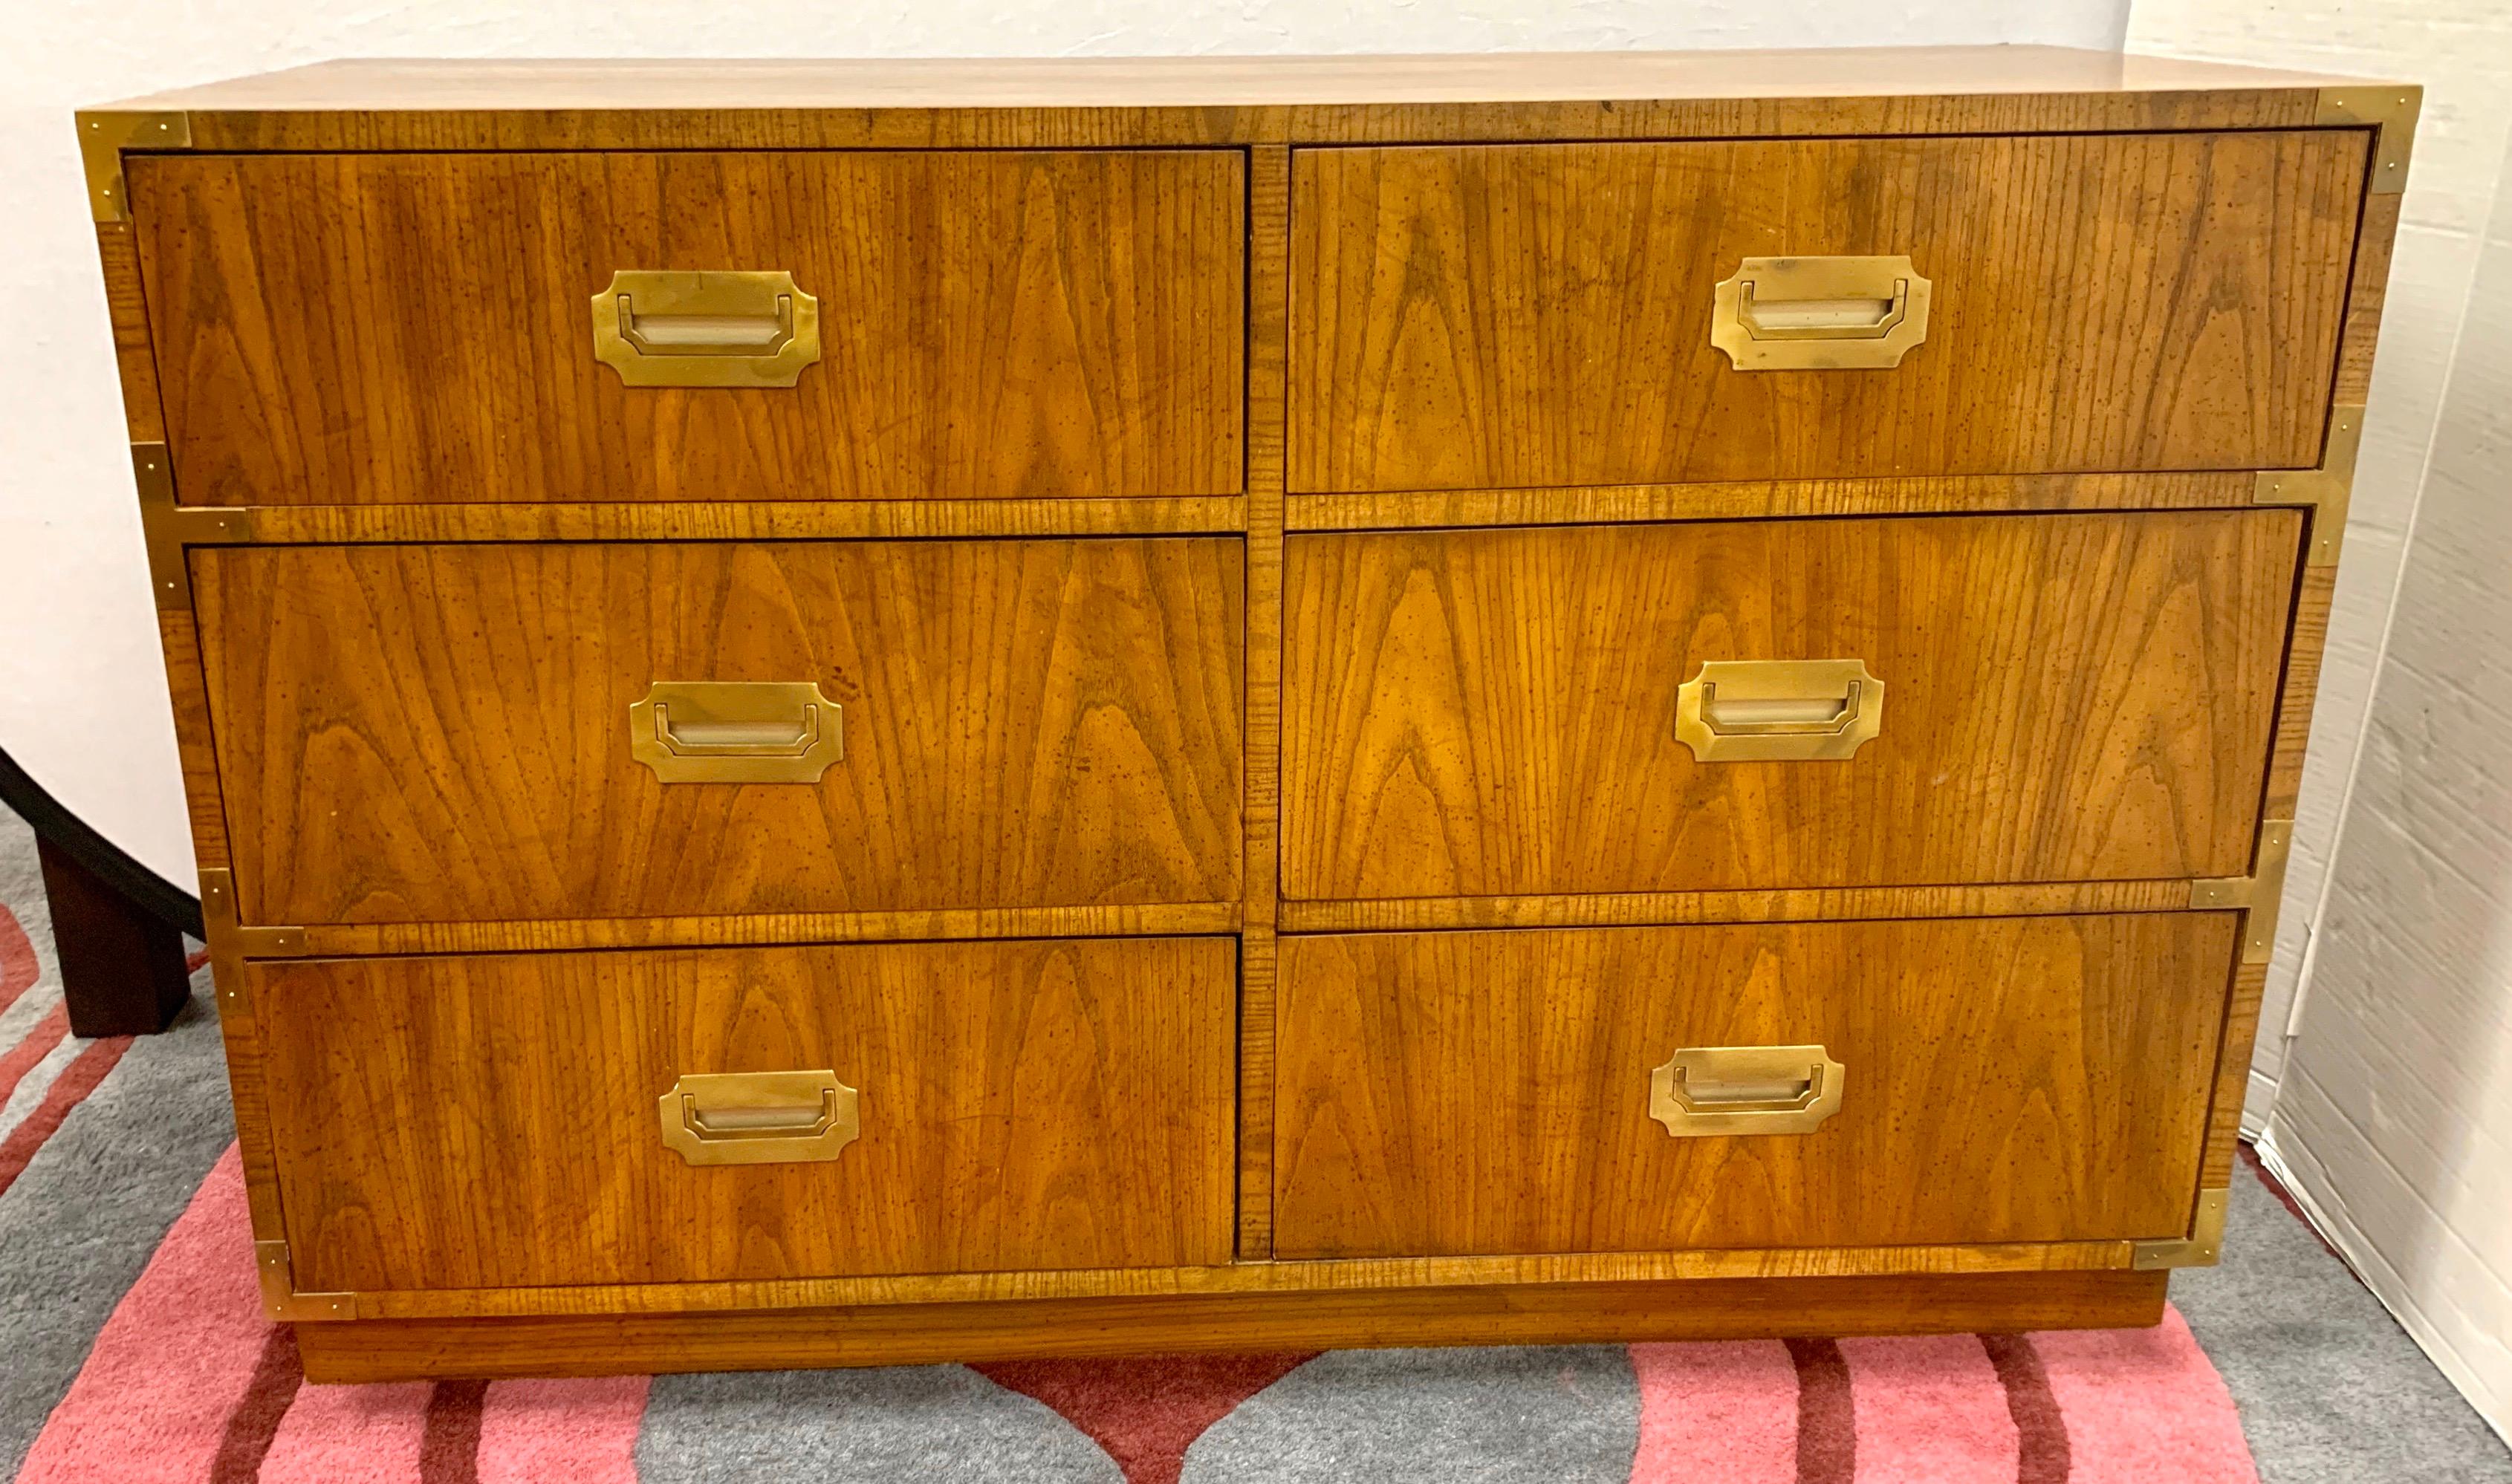 Coveted campaign style two piece writing desk with dresser chest of drawers. Make is Dixie and style is the Campaigner. Made in USA, circa 1960s-1970s.